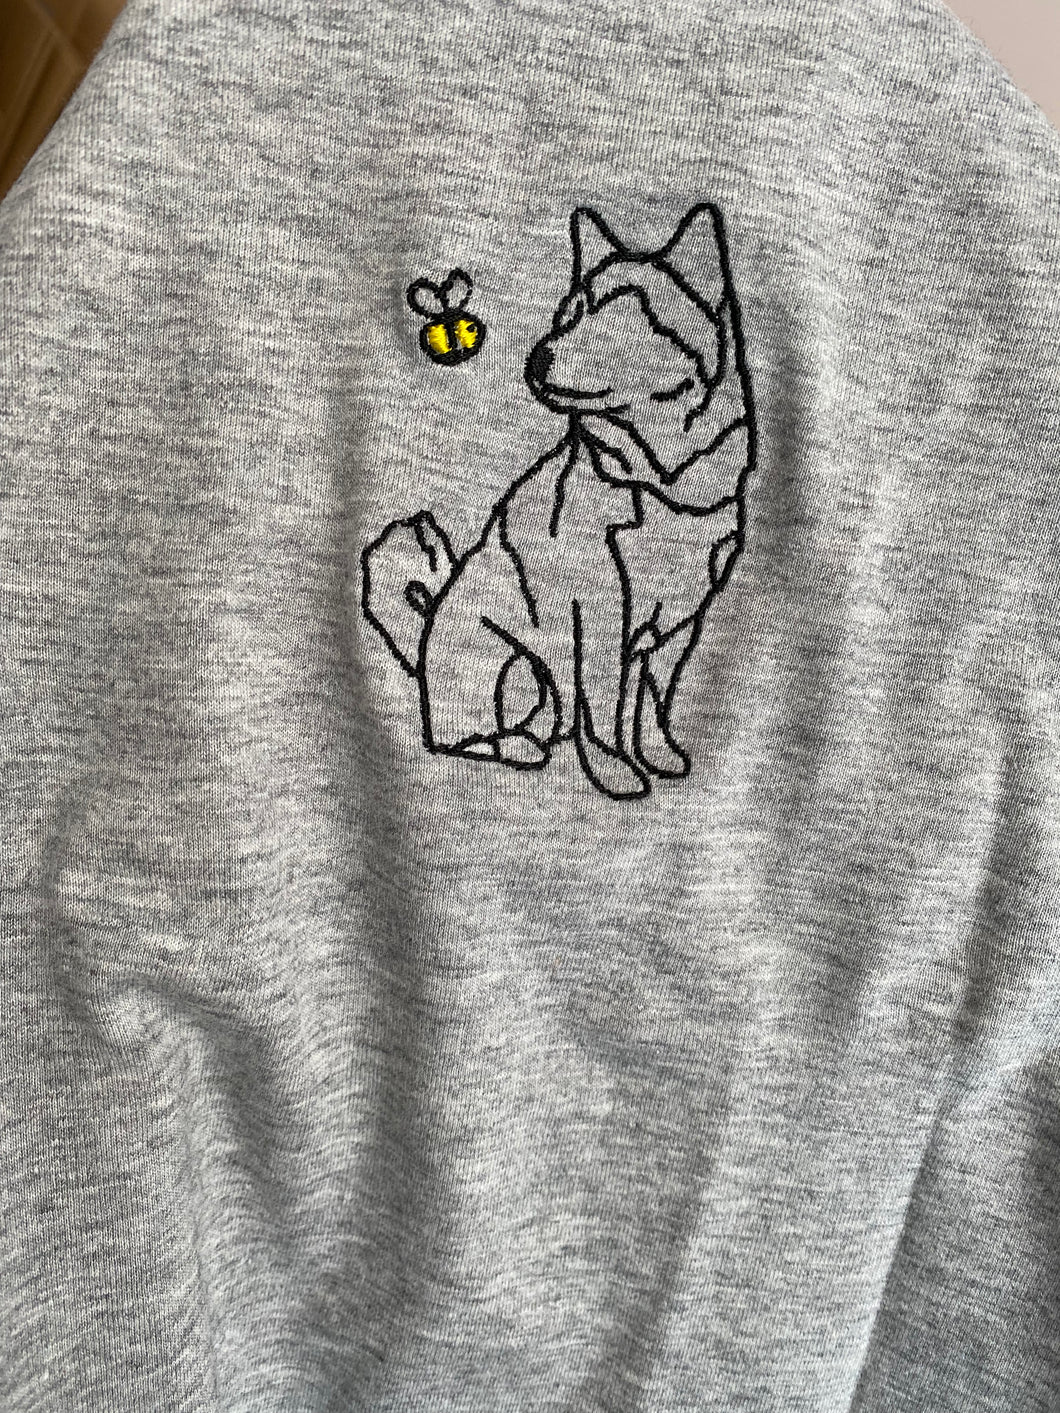 Shiba Inu Outline T-shirt - embroidered shiba organic tee for dog lovers and owners